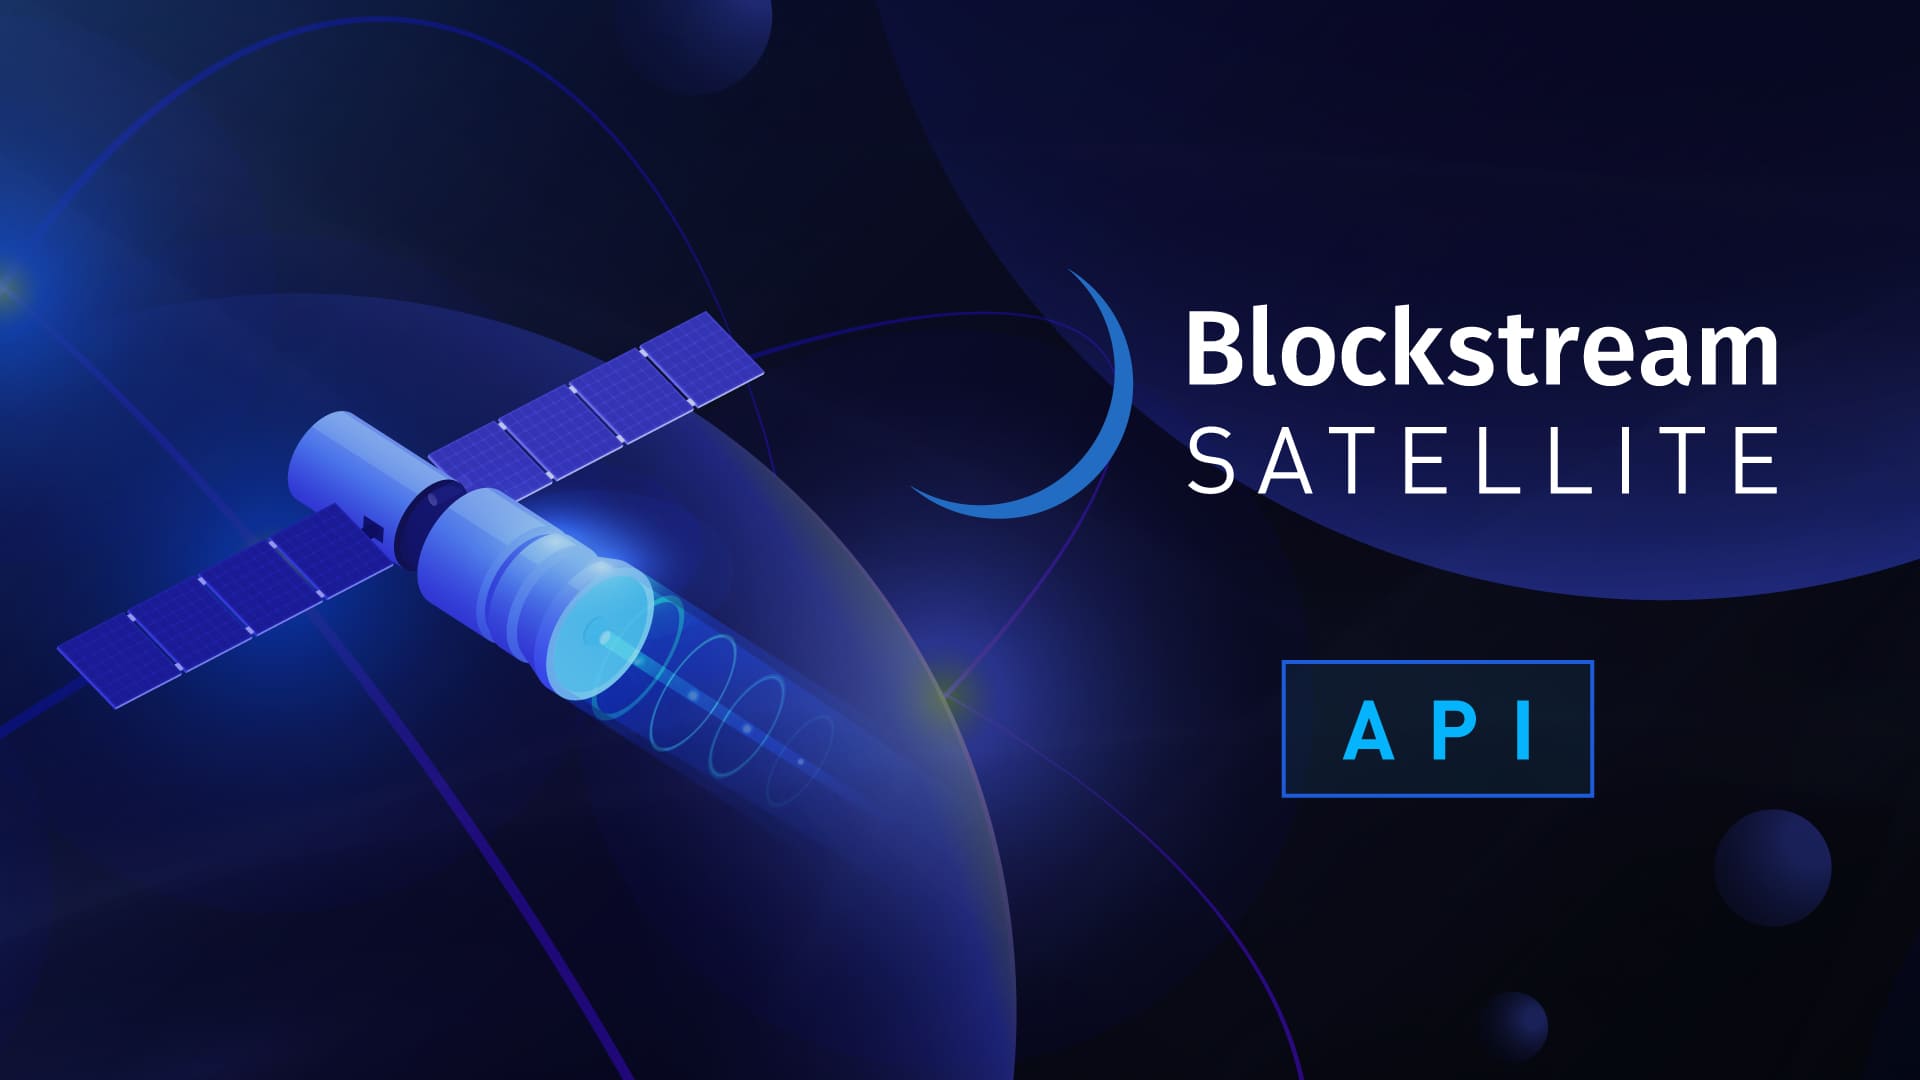 Beta Version of Satellite API to Broadcast Data Being Launched by a Tech Blockchain Company Blockstream